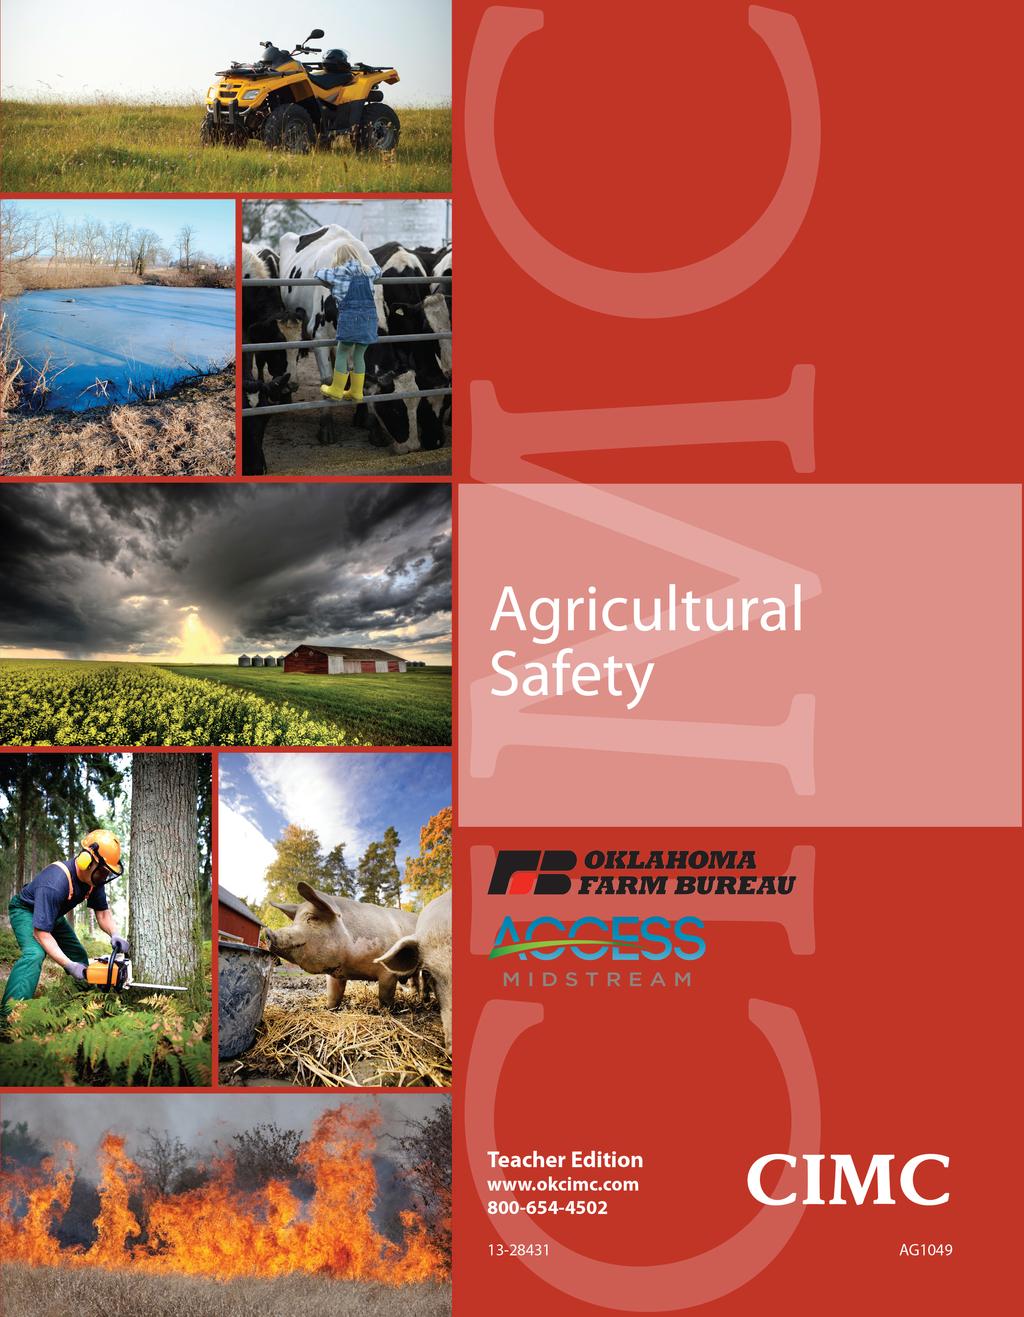 This free sample provided by CIMC 800.654.4502 Agricultural Safety Agricultural Safety is a handy reference guide for secondary and post -secondary students.